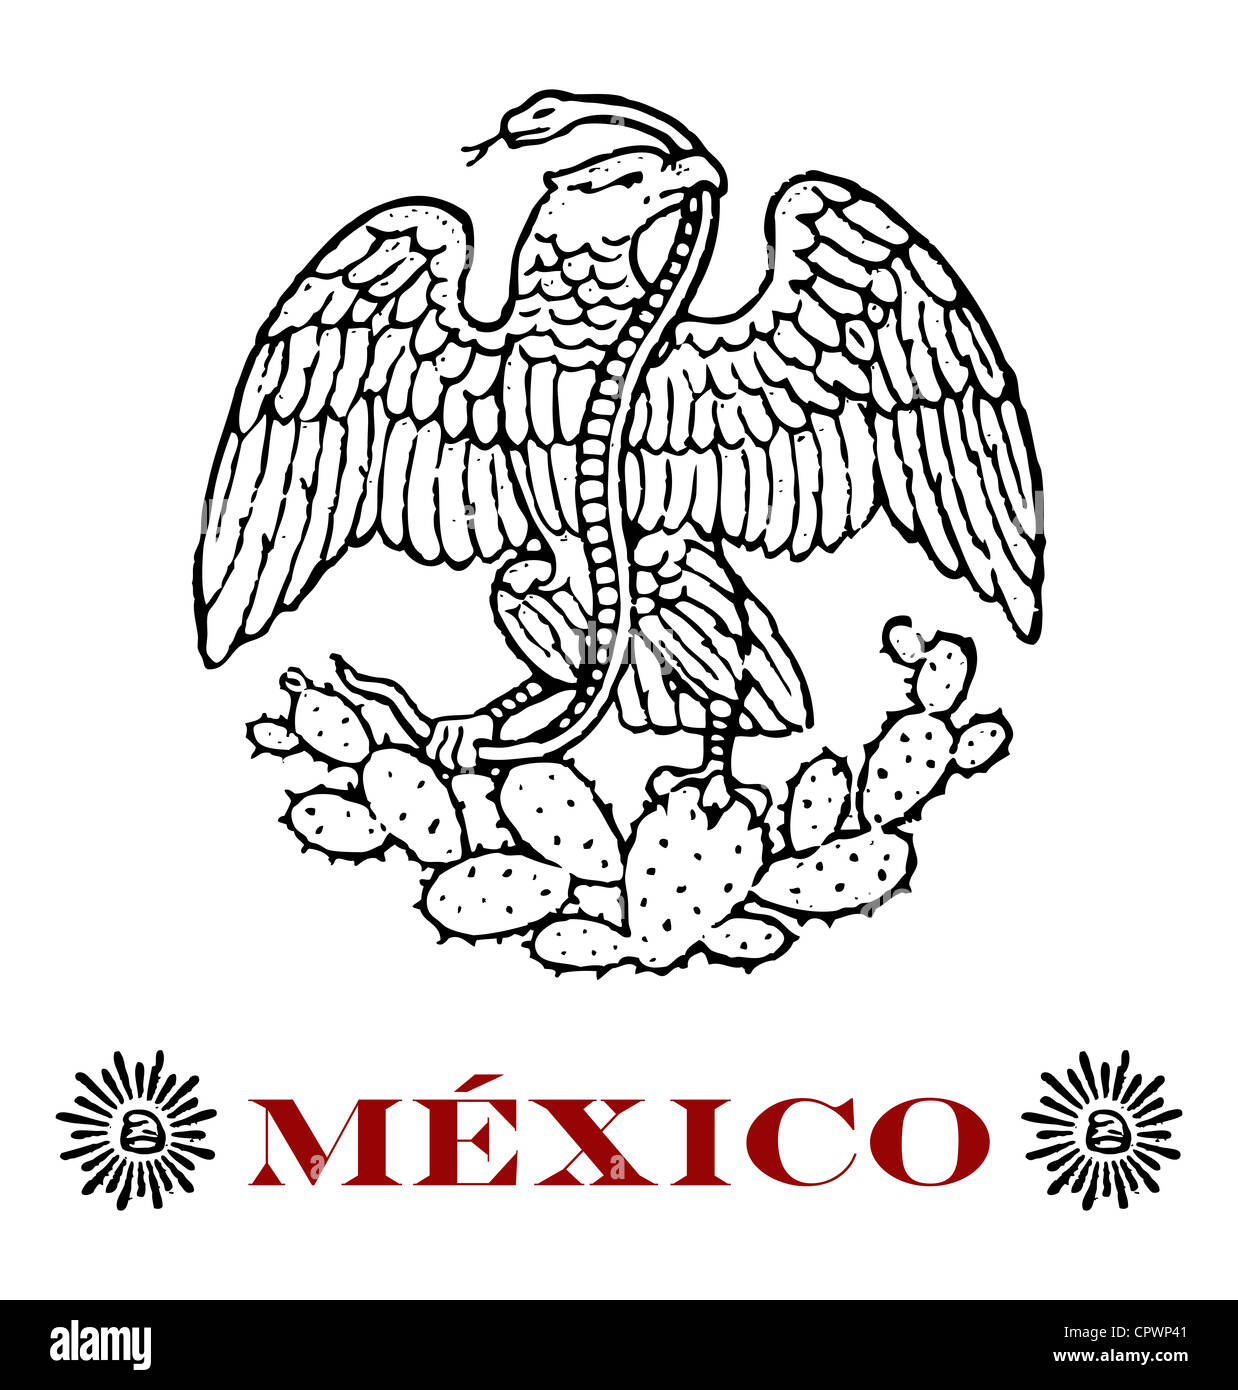 Mexican eagle Cut Out Stock Images & Pictures - Alamy